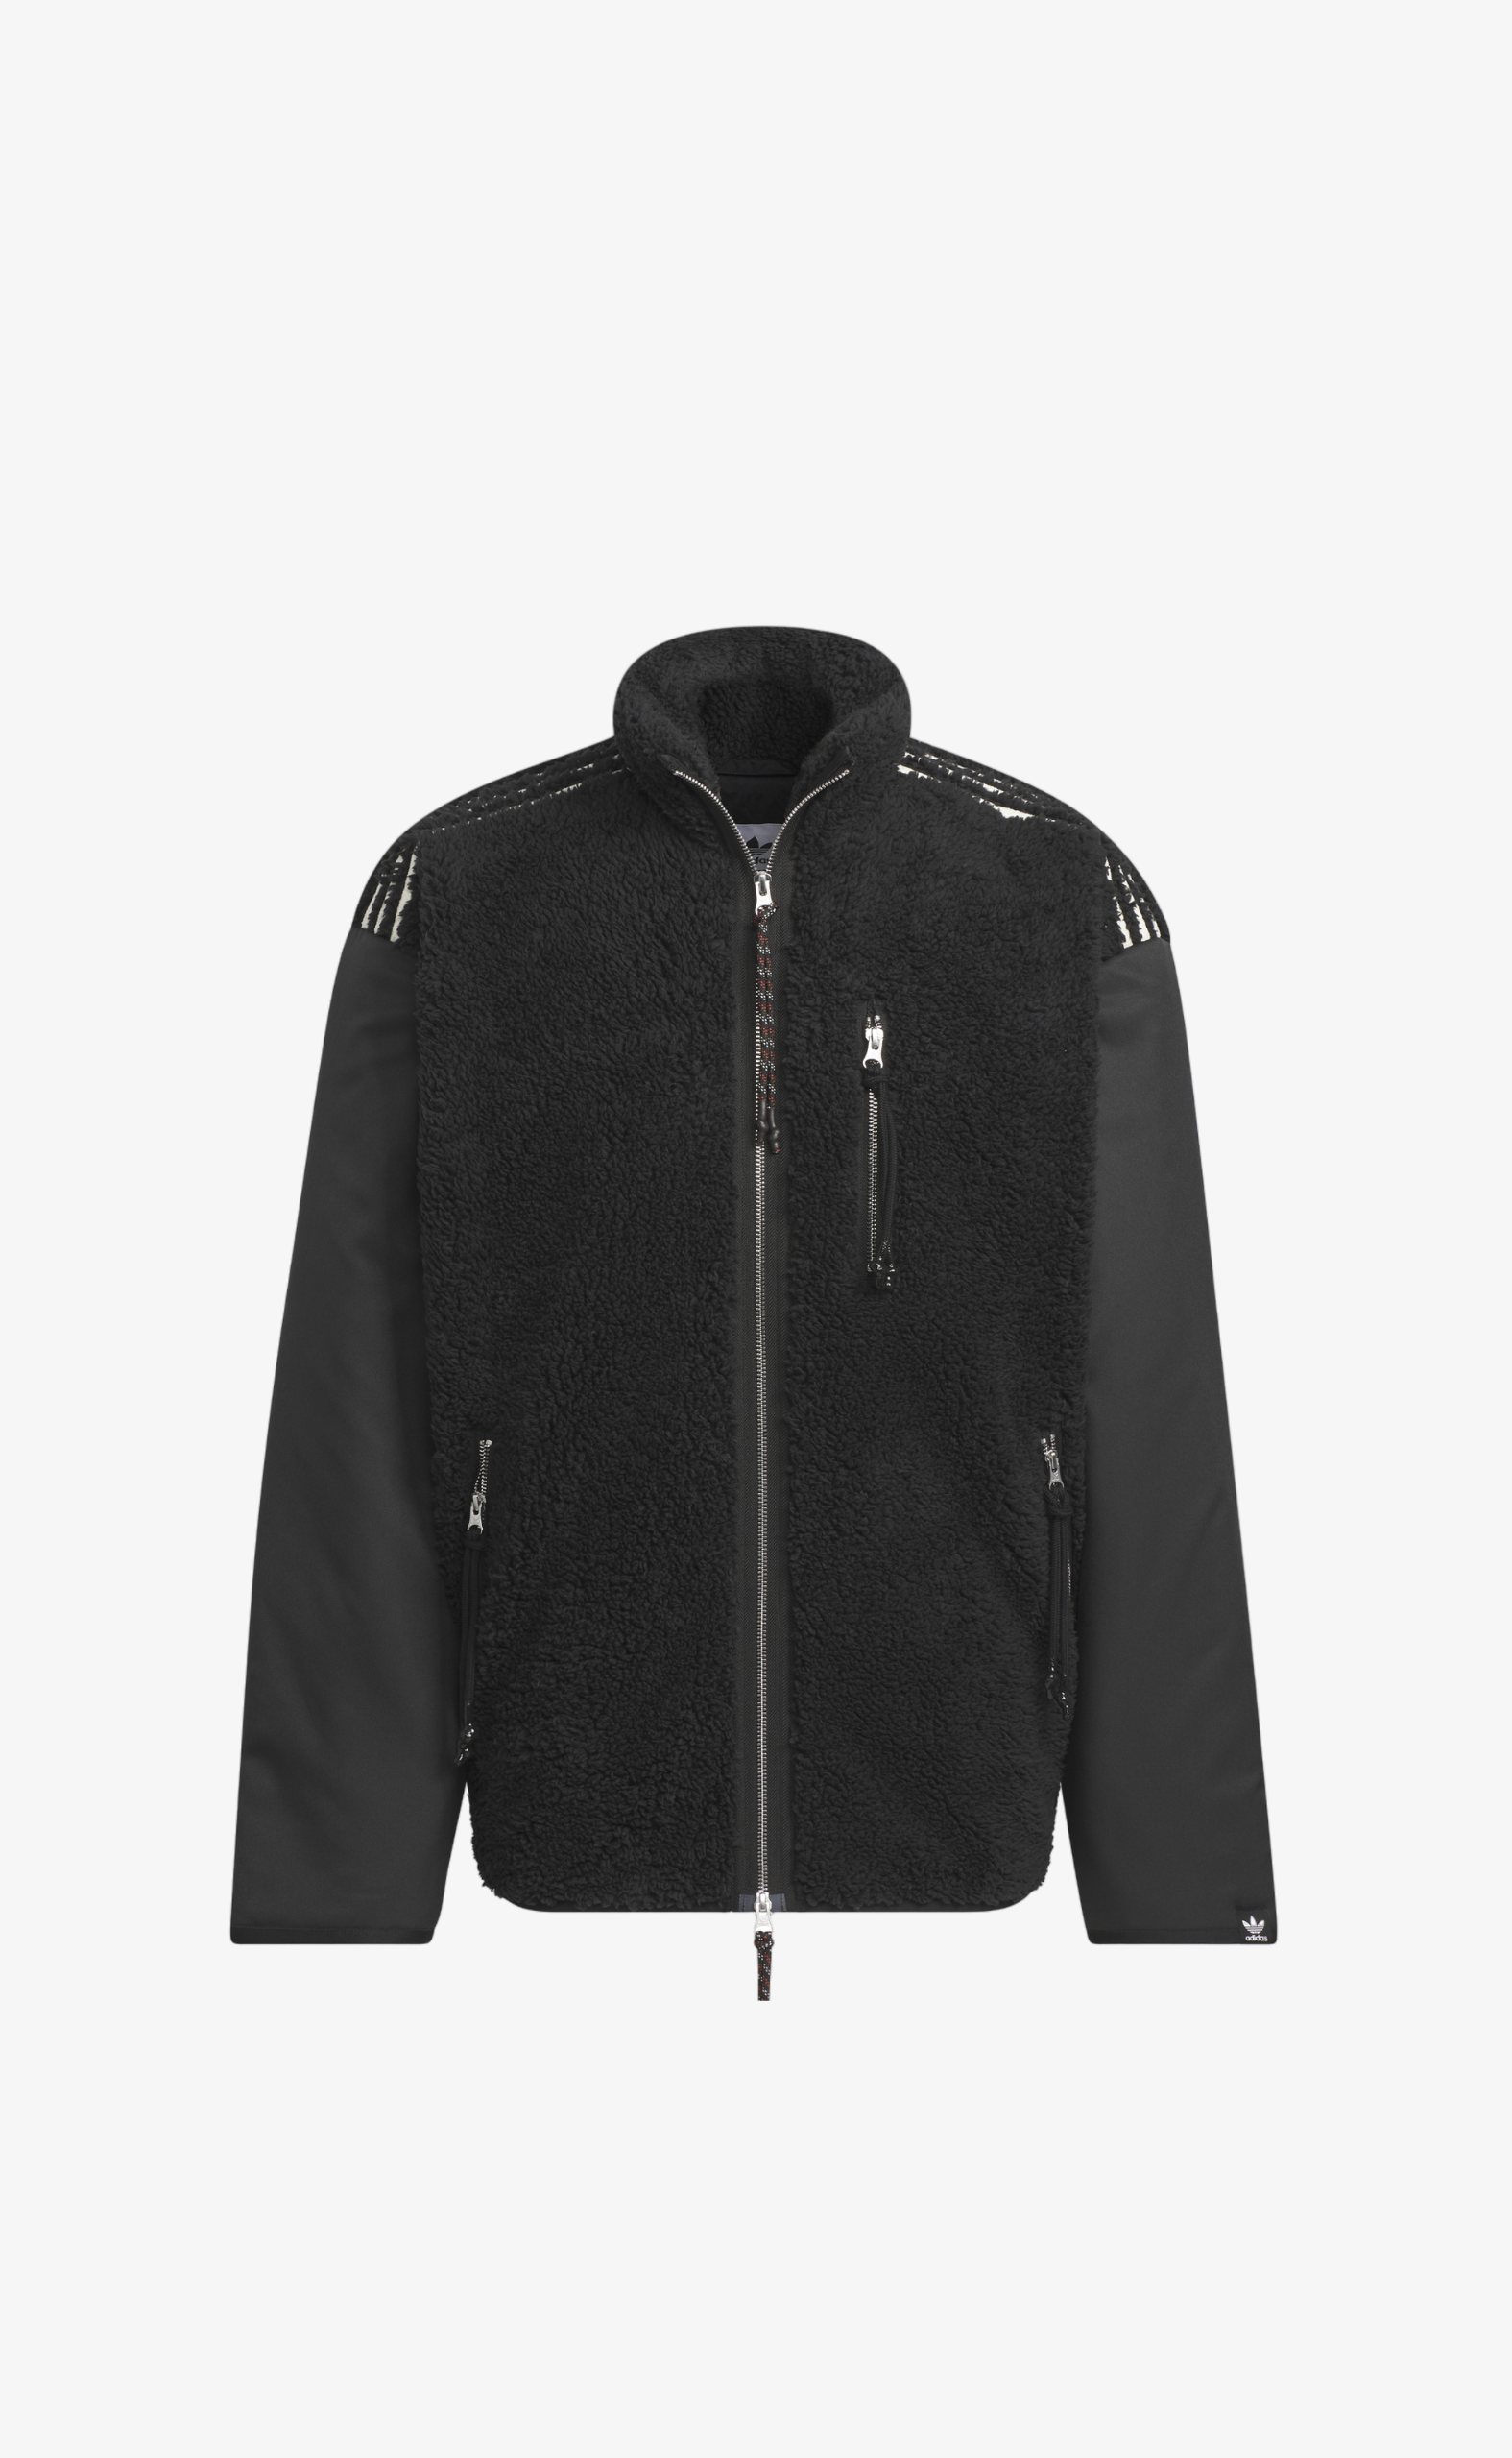 SONG FOR THE MUTE FLEECE  BLACK JACKET